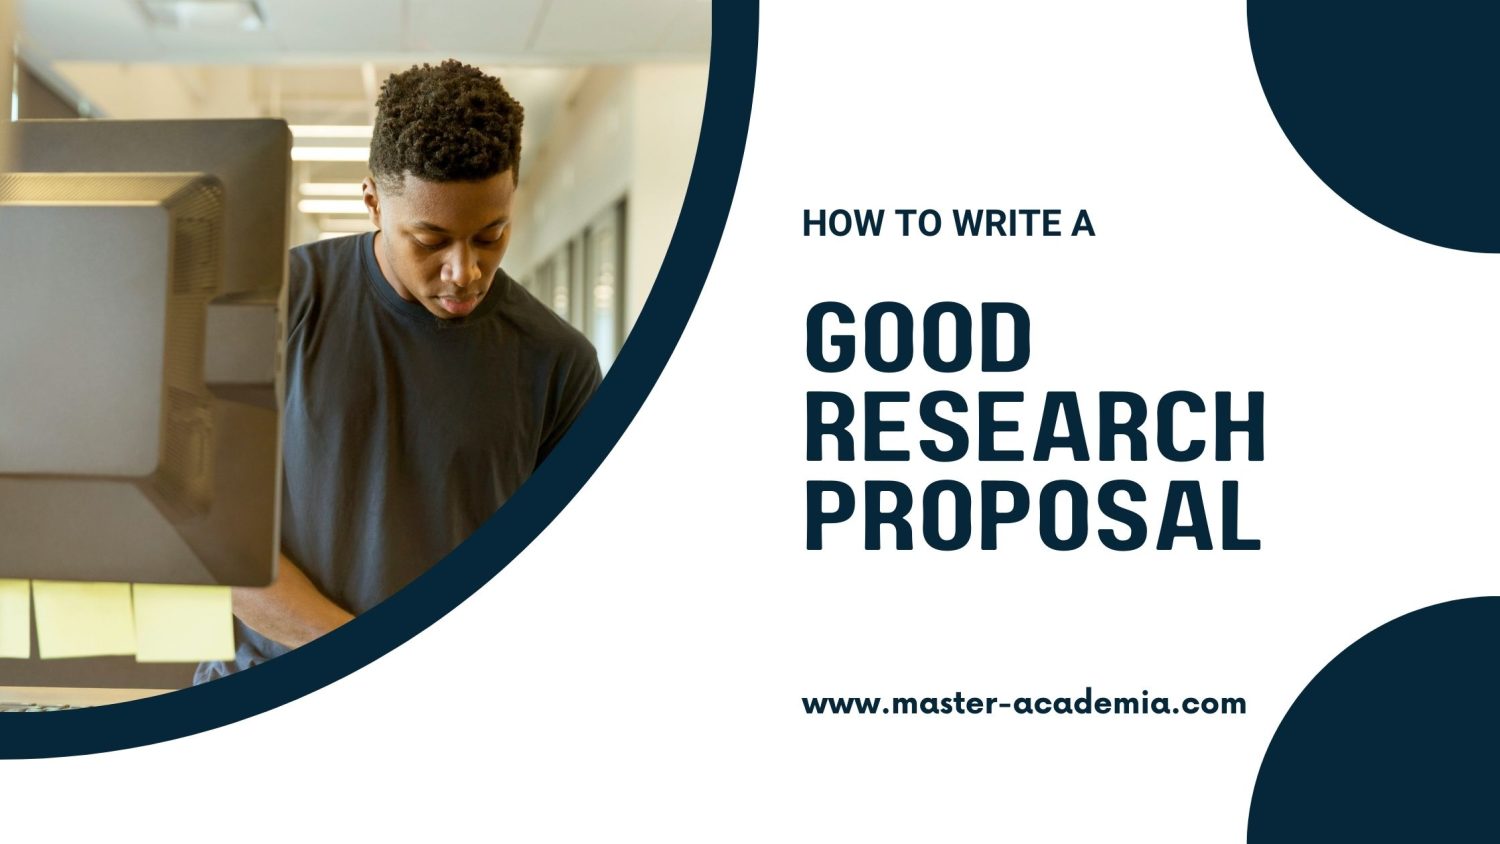 write research proposal steps in detail